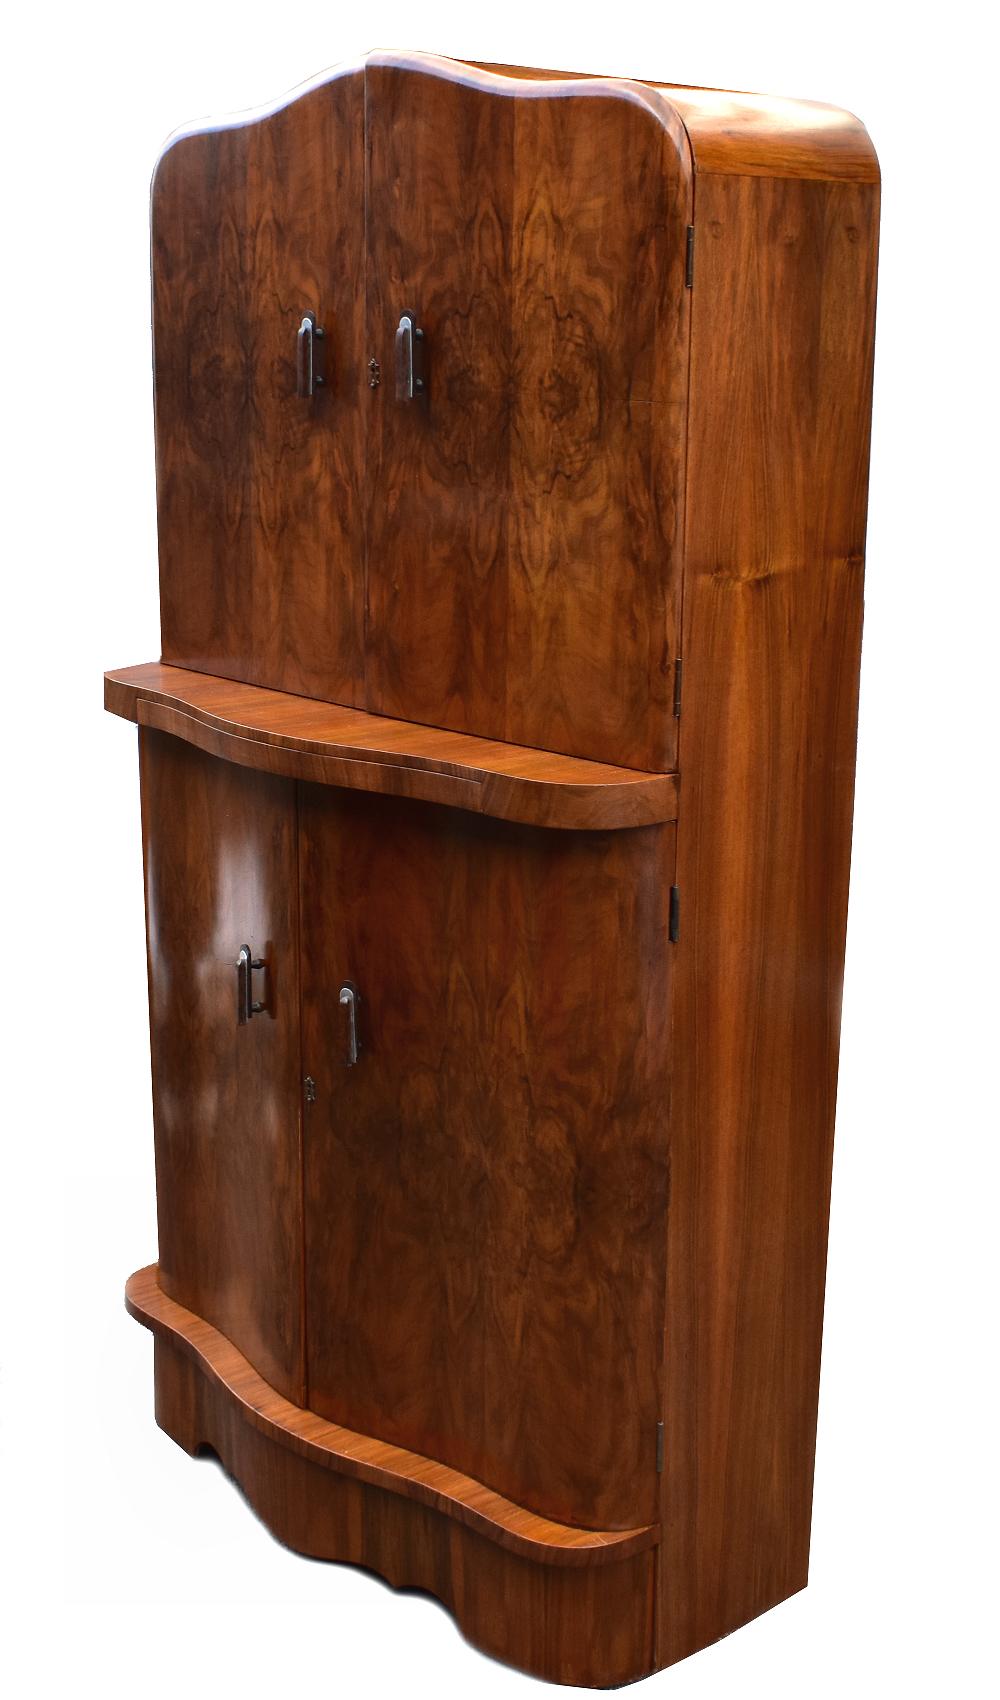 This hugely stylish cocktail cabinet is a fantastic piece of Art Deco furniture, and it's internal features prove to be an incredibly appealing feature. The beautifully presented burr walnut veneers have a superb pattern of grain, serpentine shaped